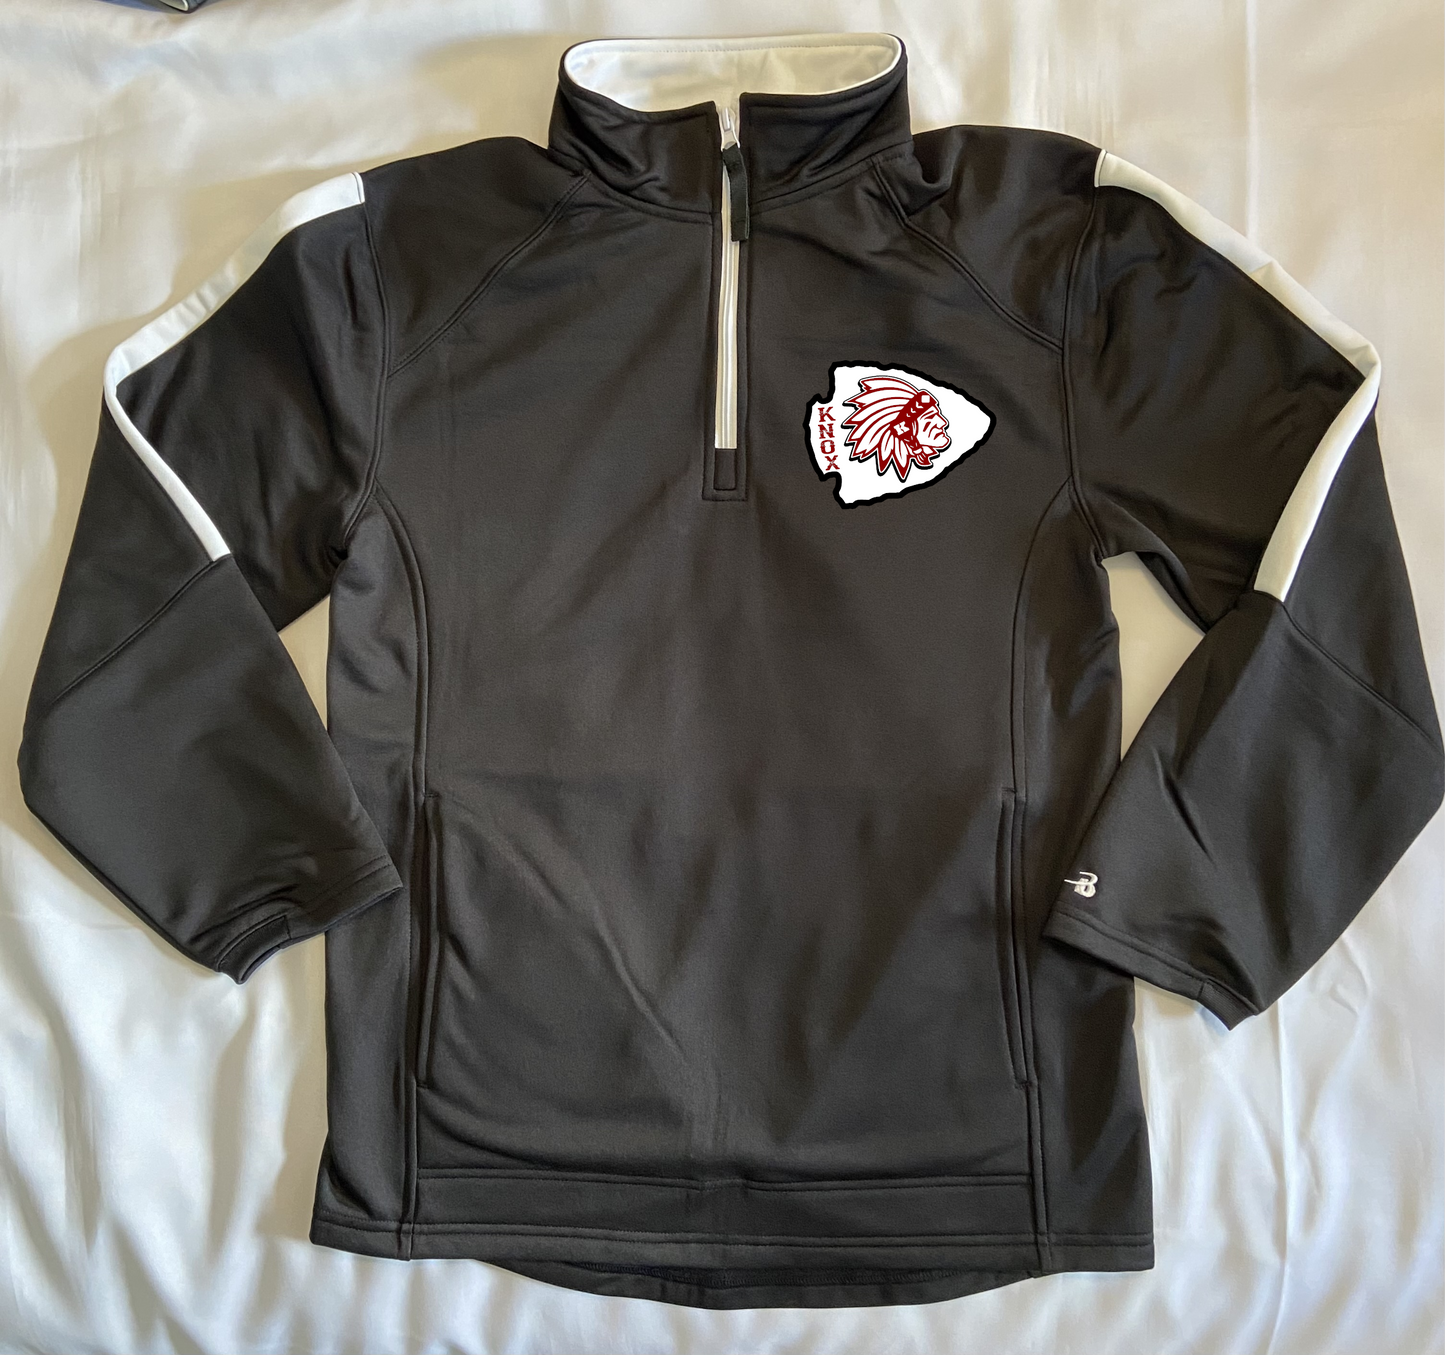 Knox Redskins Fleece Lined 1/4 Zip Pullover - Badger Brand - Limited Sizes/Colors Available